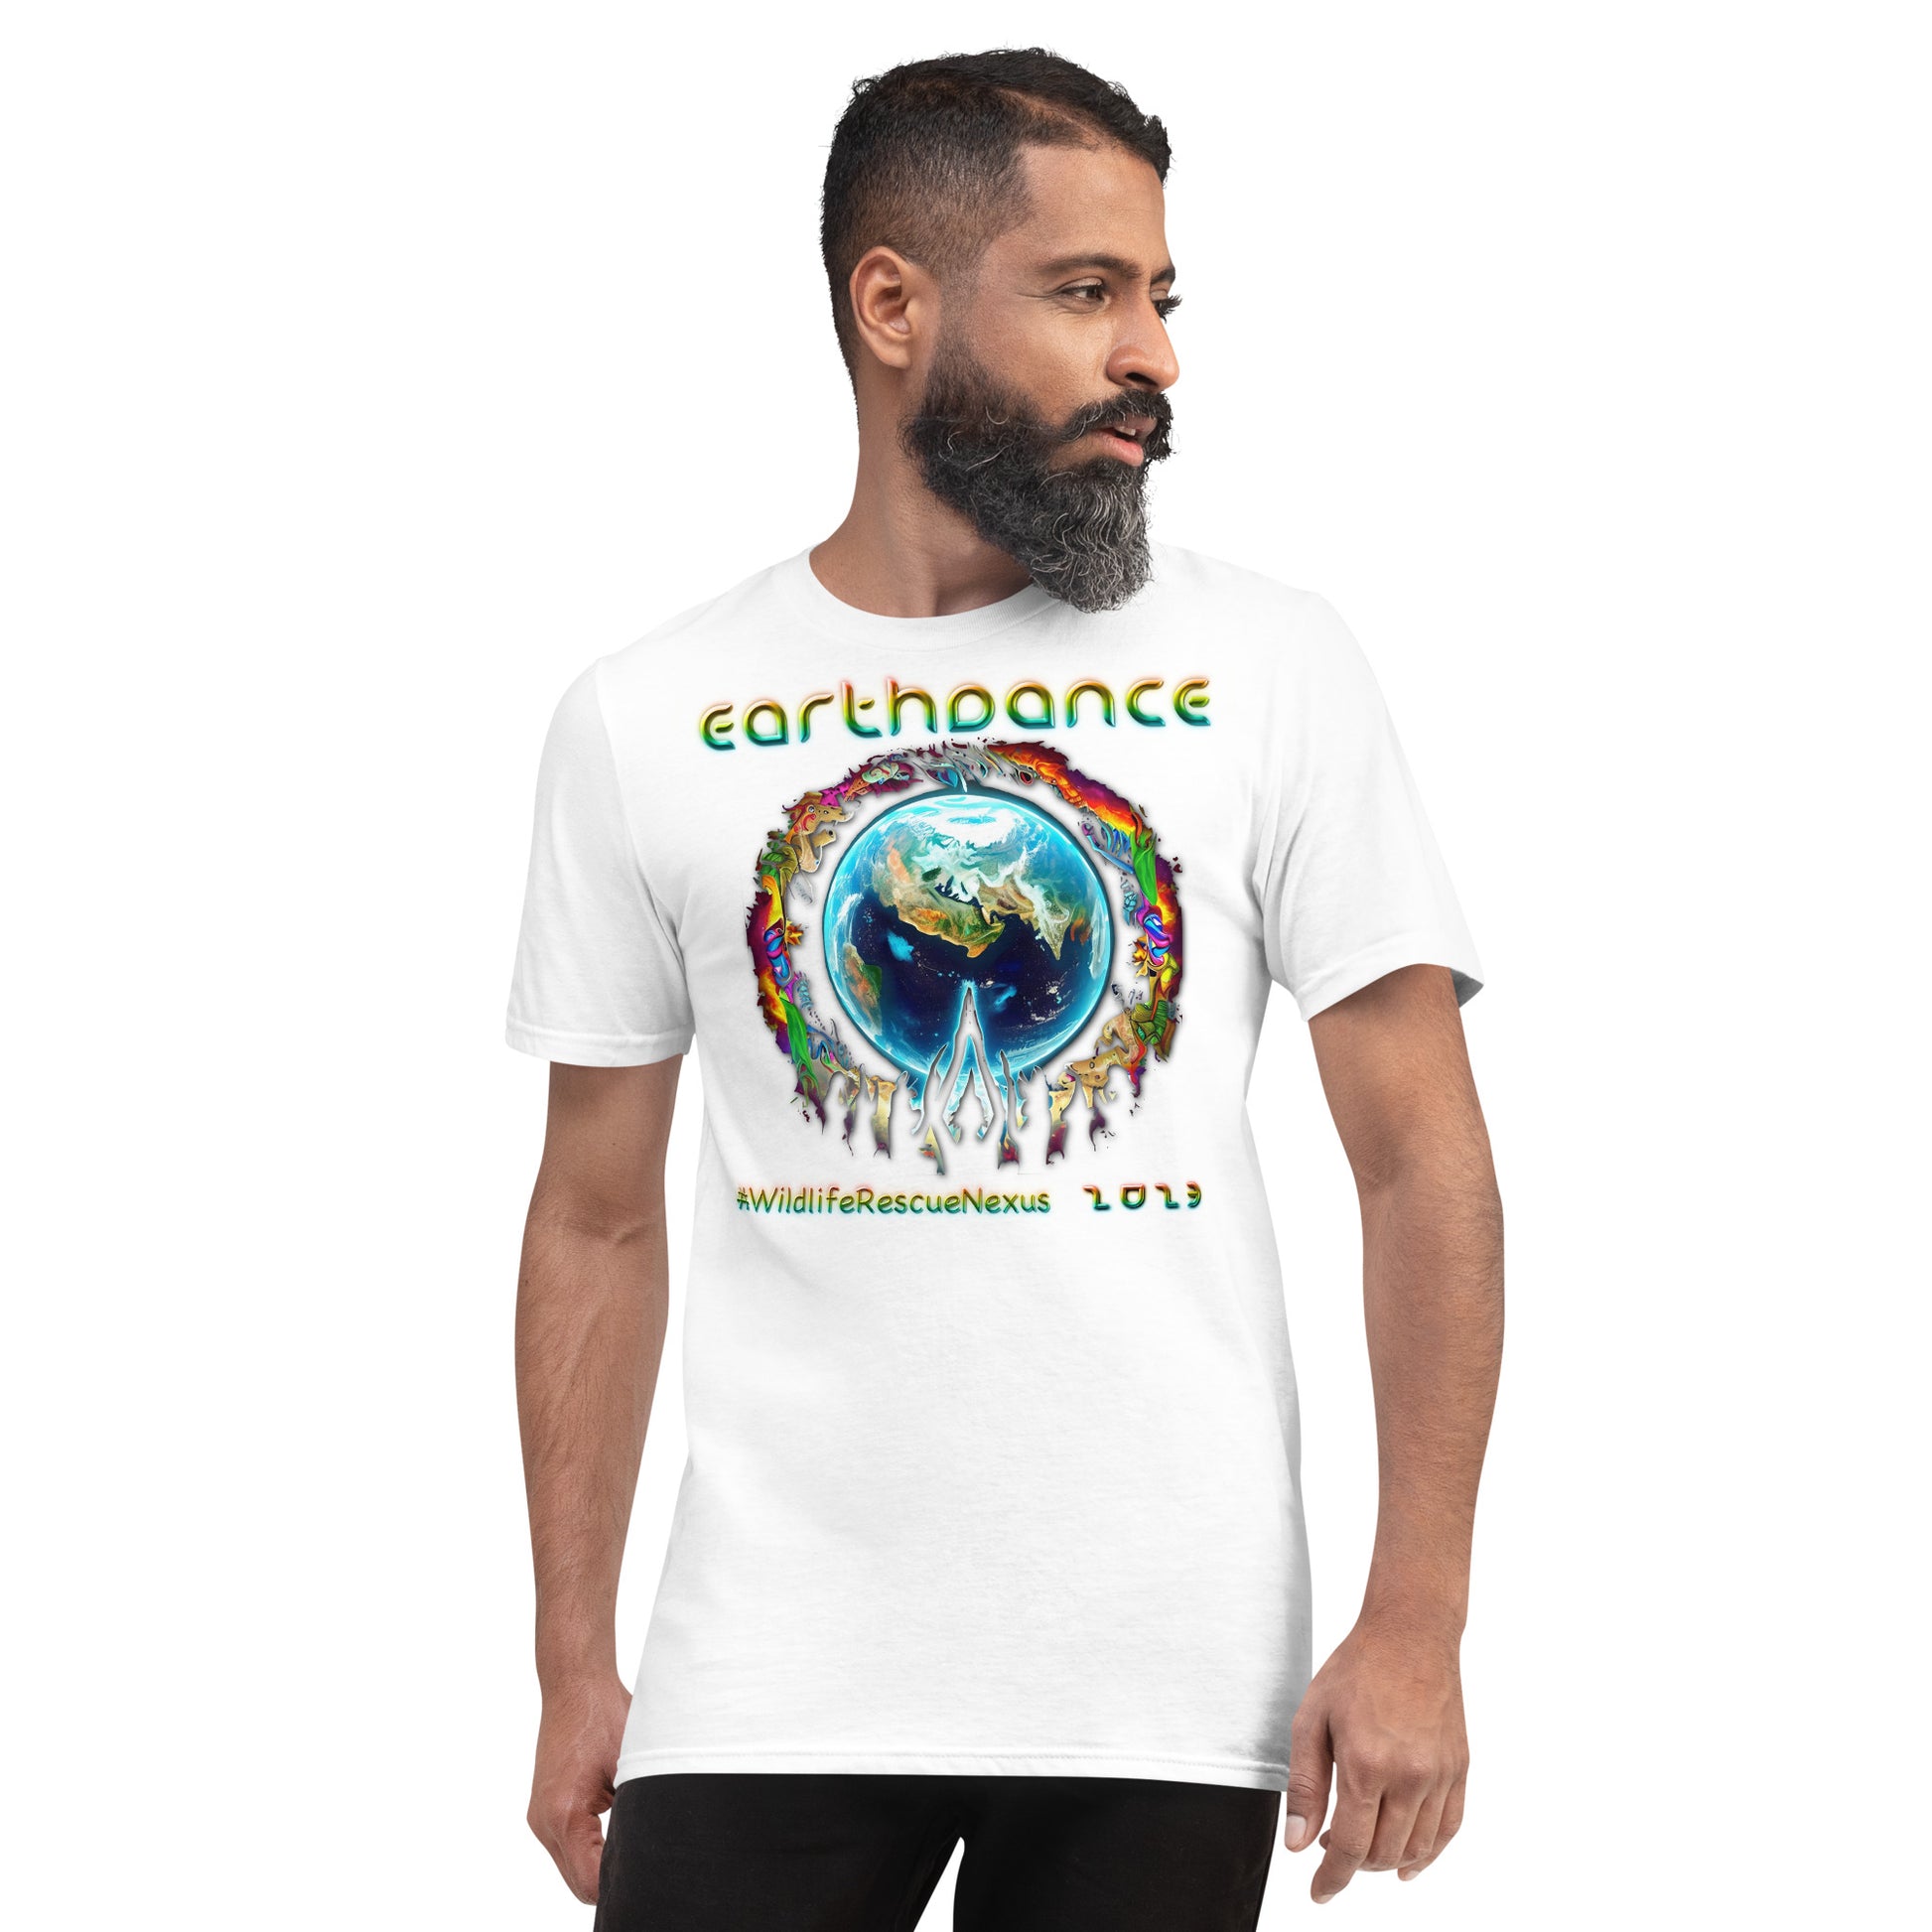 Earthdance 2023 - Sneakatoke v1 - Limited Edition - Short-Sleeve T-Shirt - The Foundation of Families